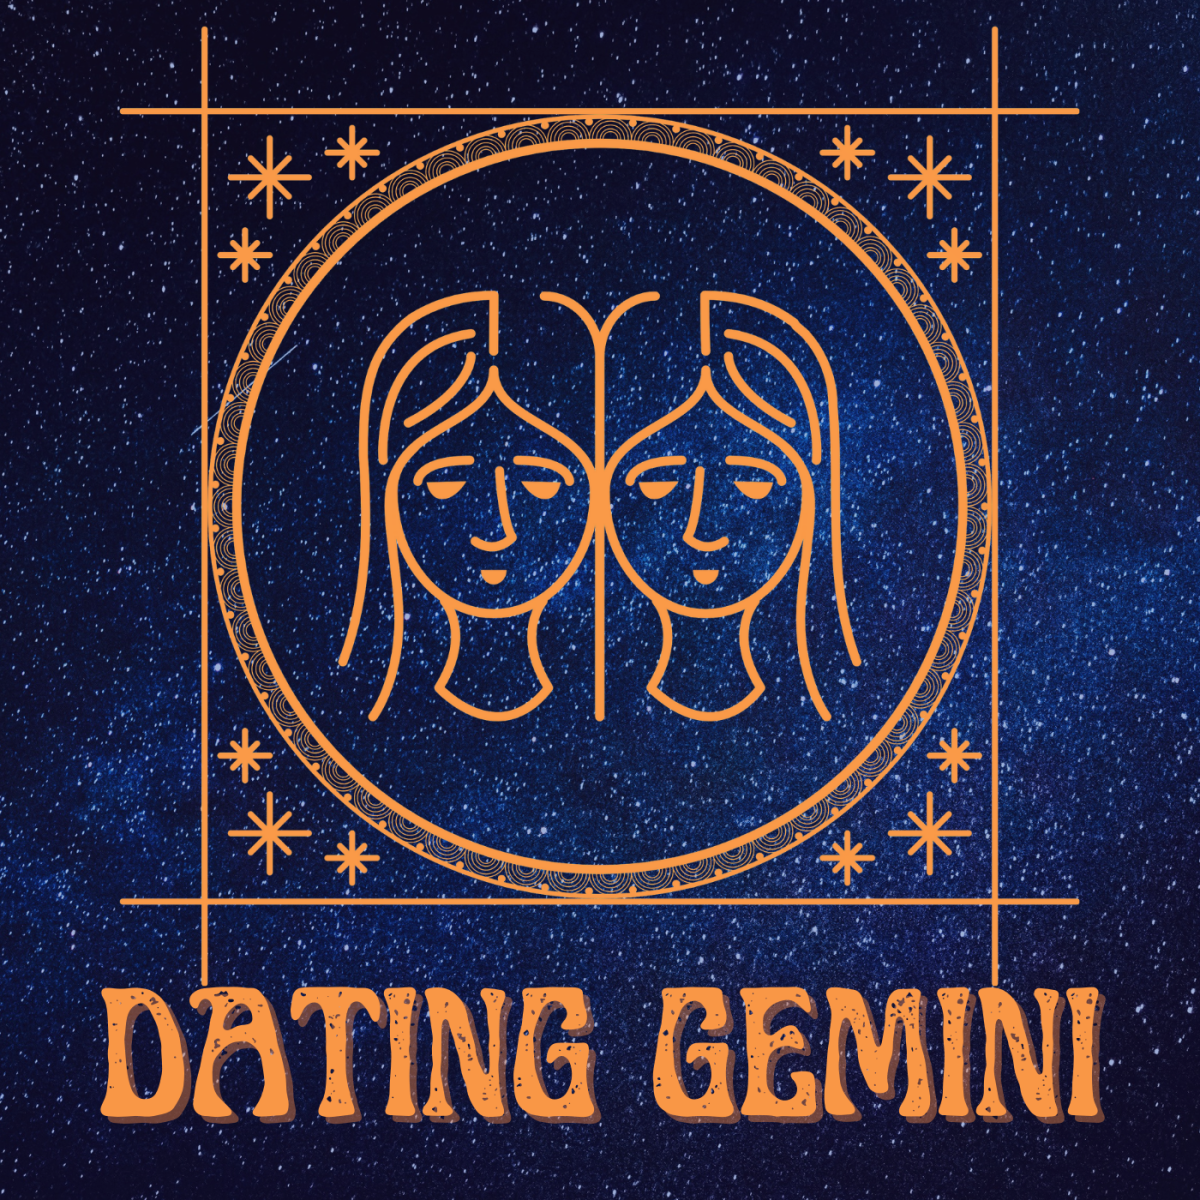 Is your partner or crush a Gemini? Find out what this sign is like in a relationship!